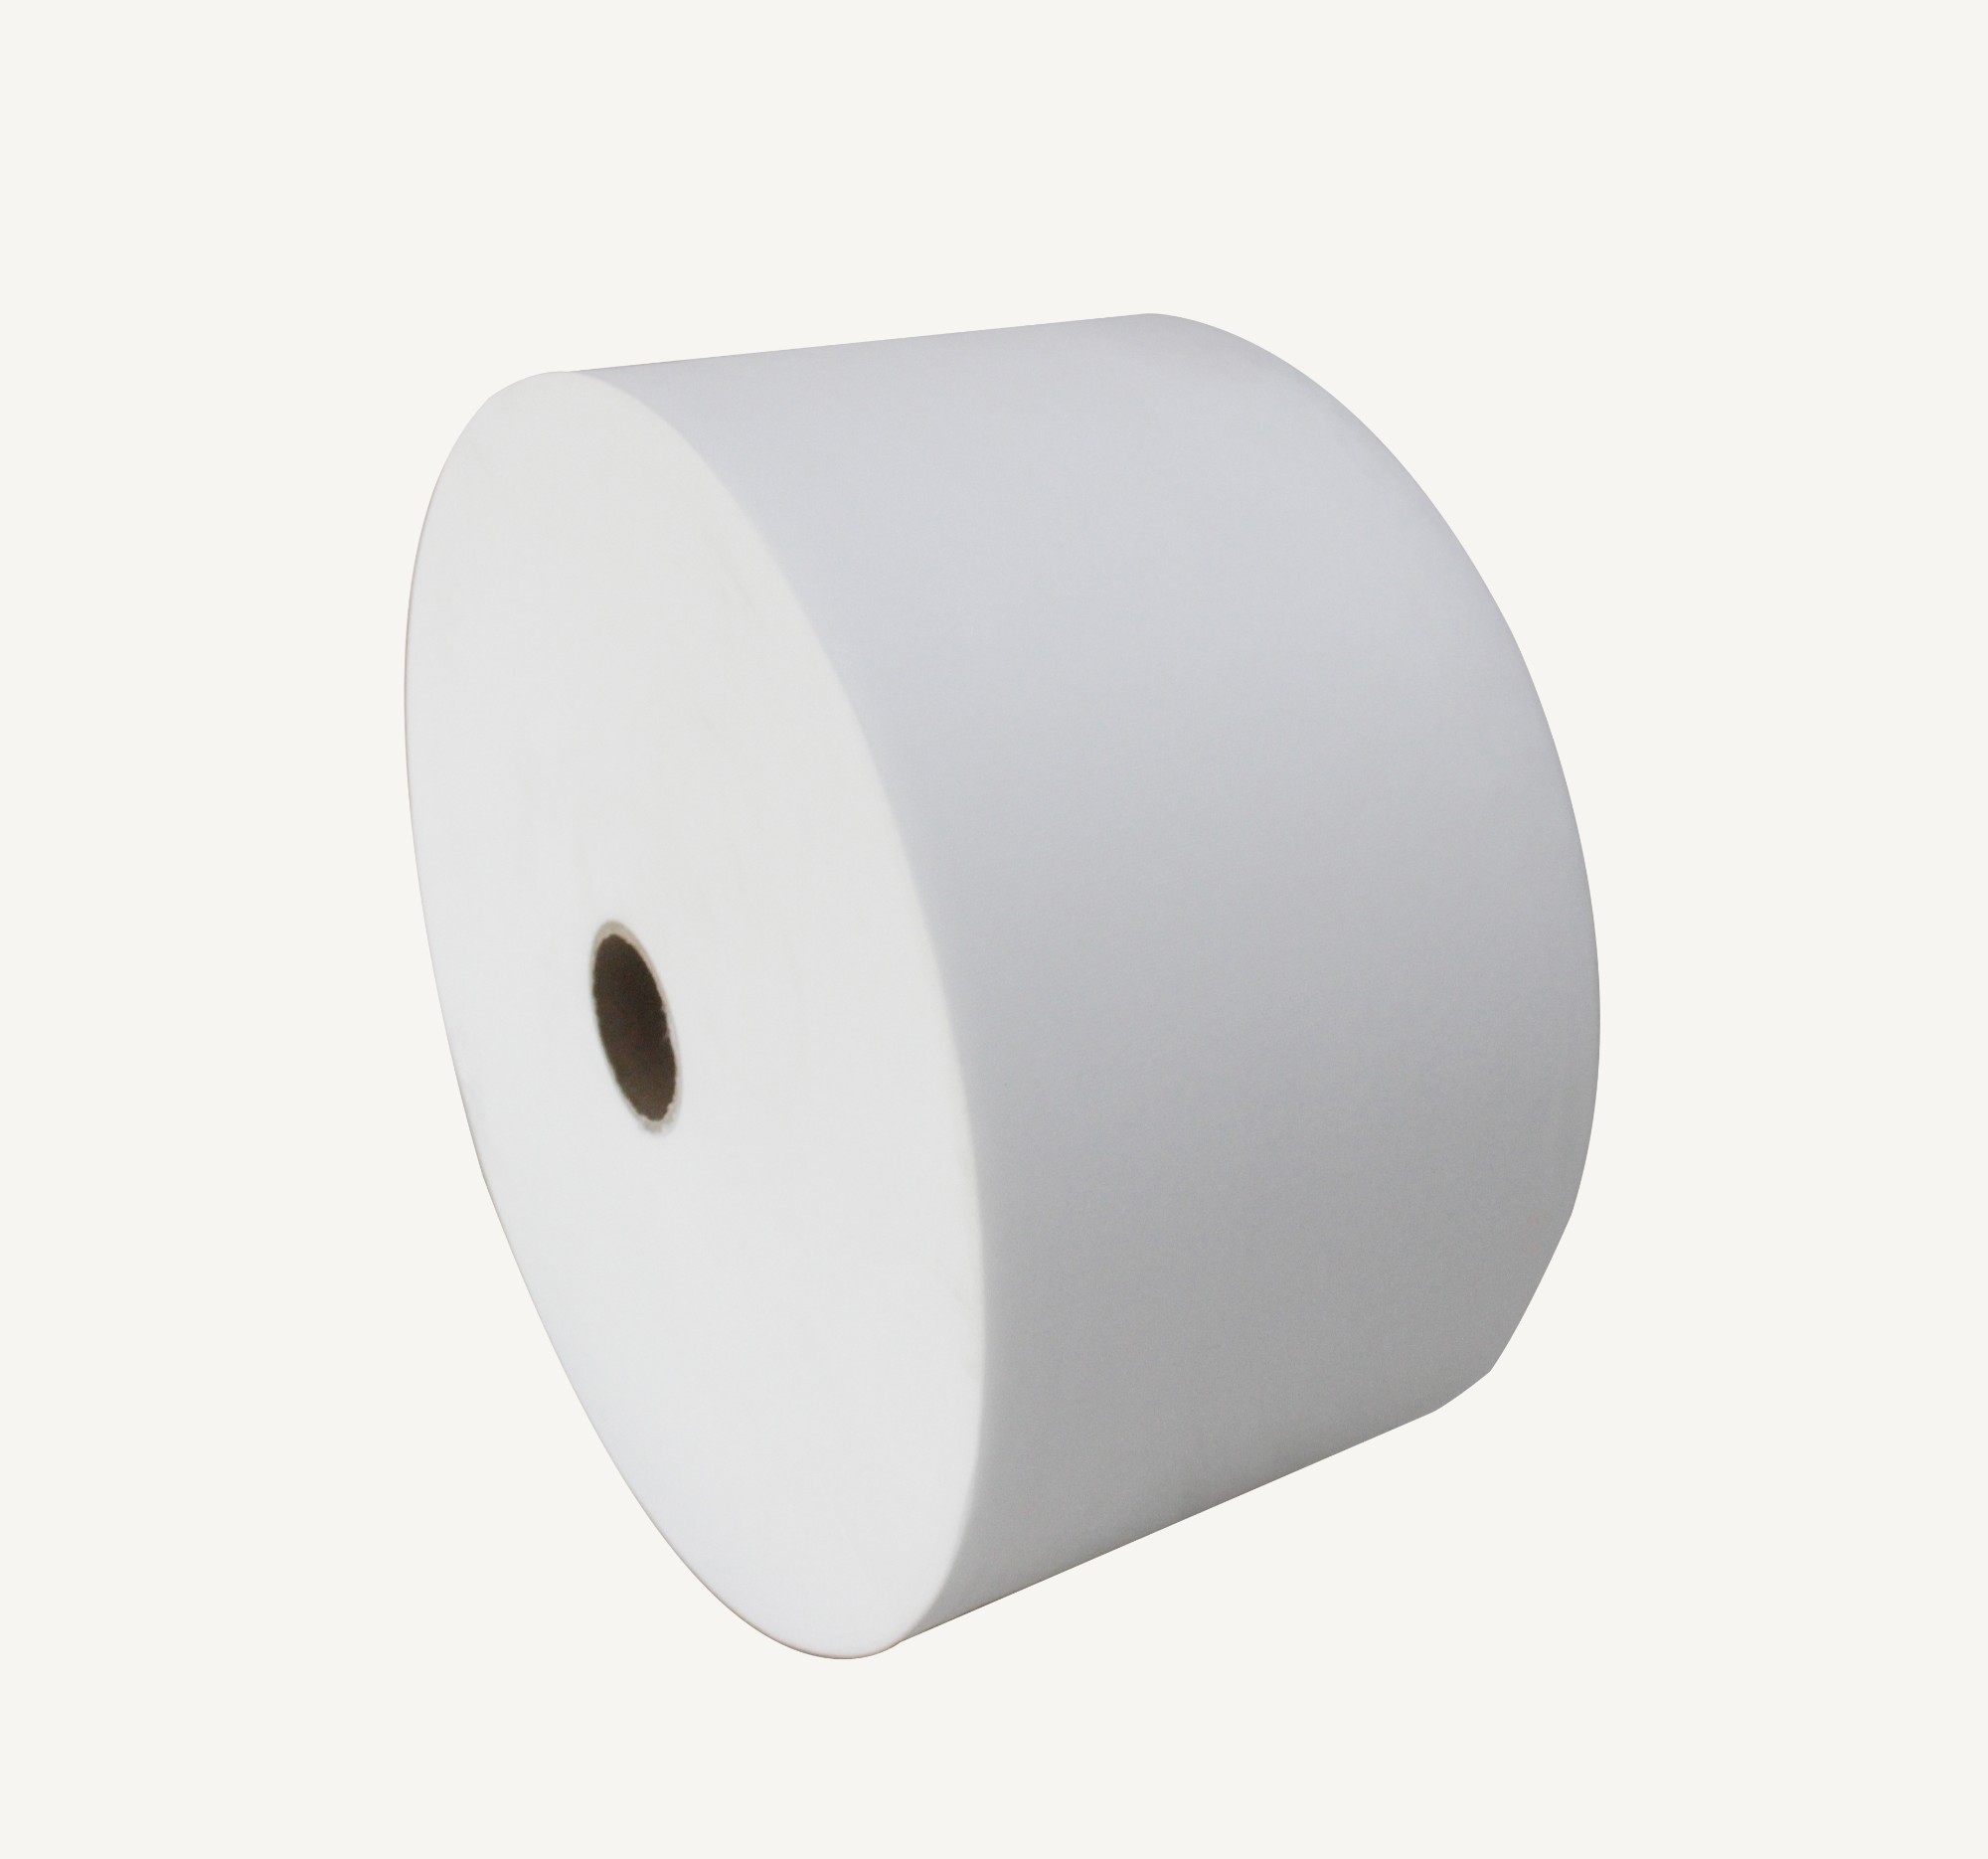 Widely Use Spunbond Nonwoven Woven Fabric Roll Material